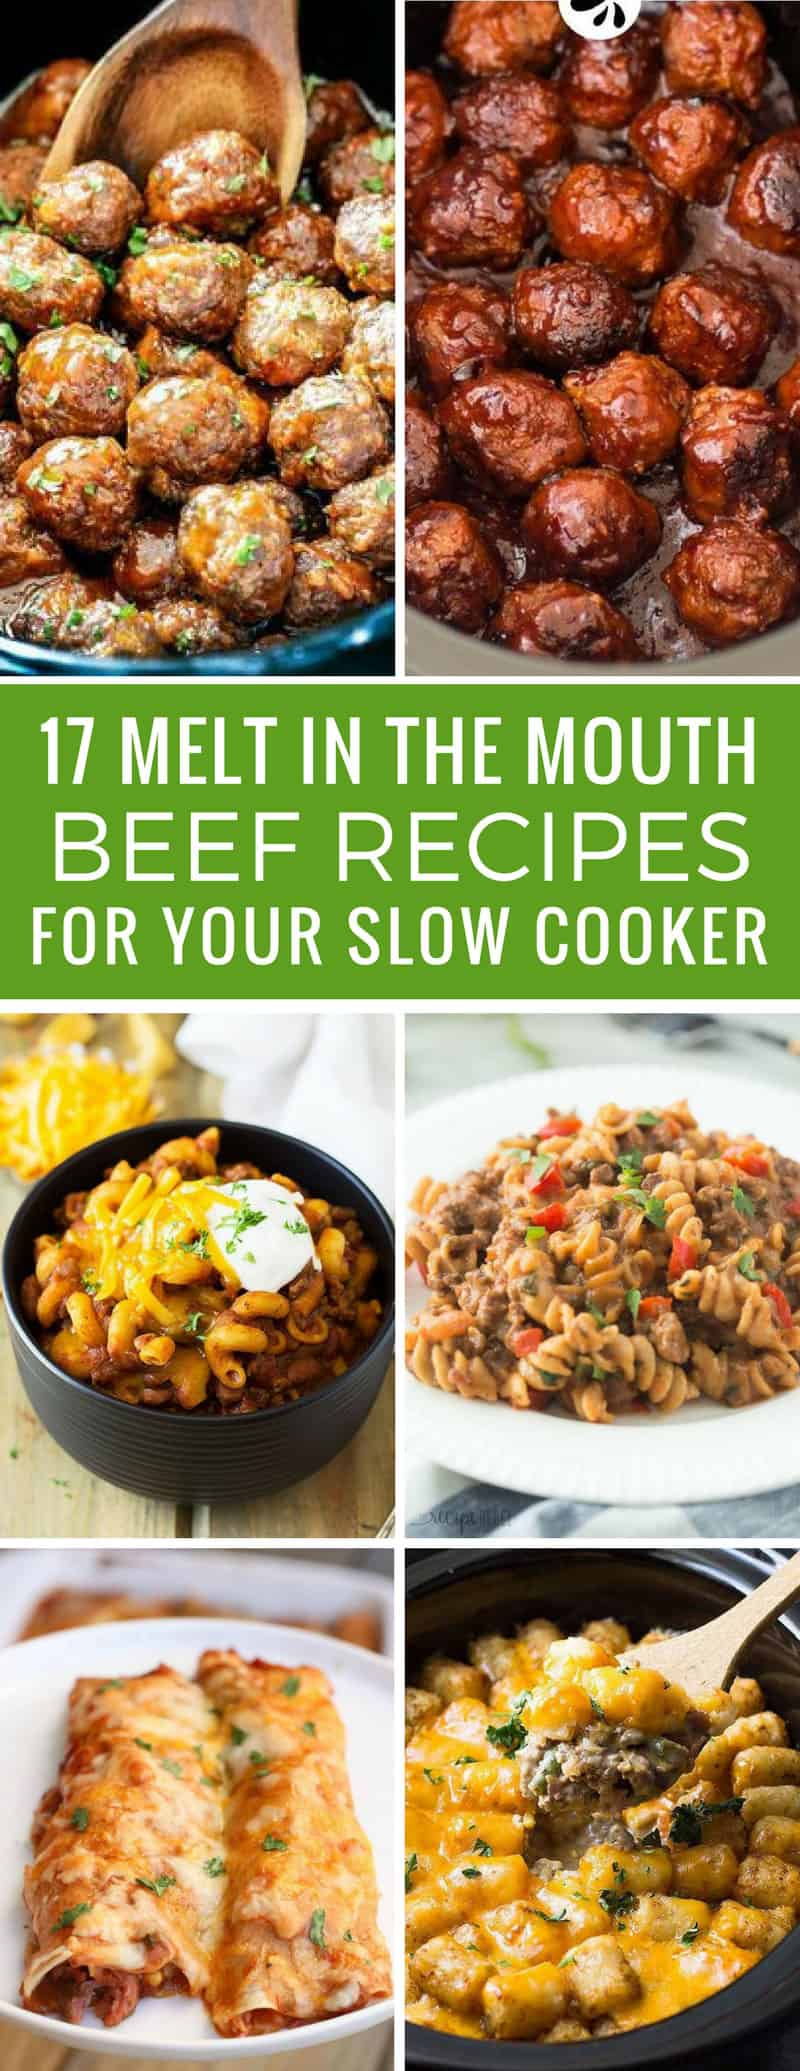 Comfort food! These slow cooker beef recipes are just what we need for Fall and Winter meal plans! Thanks for sharing!